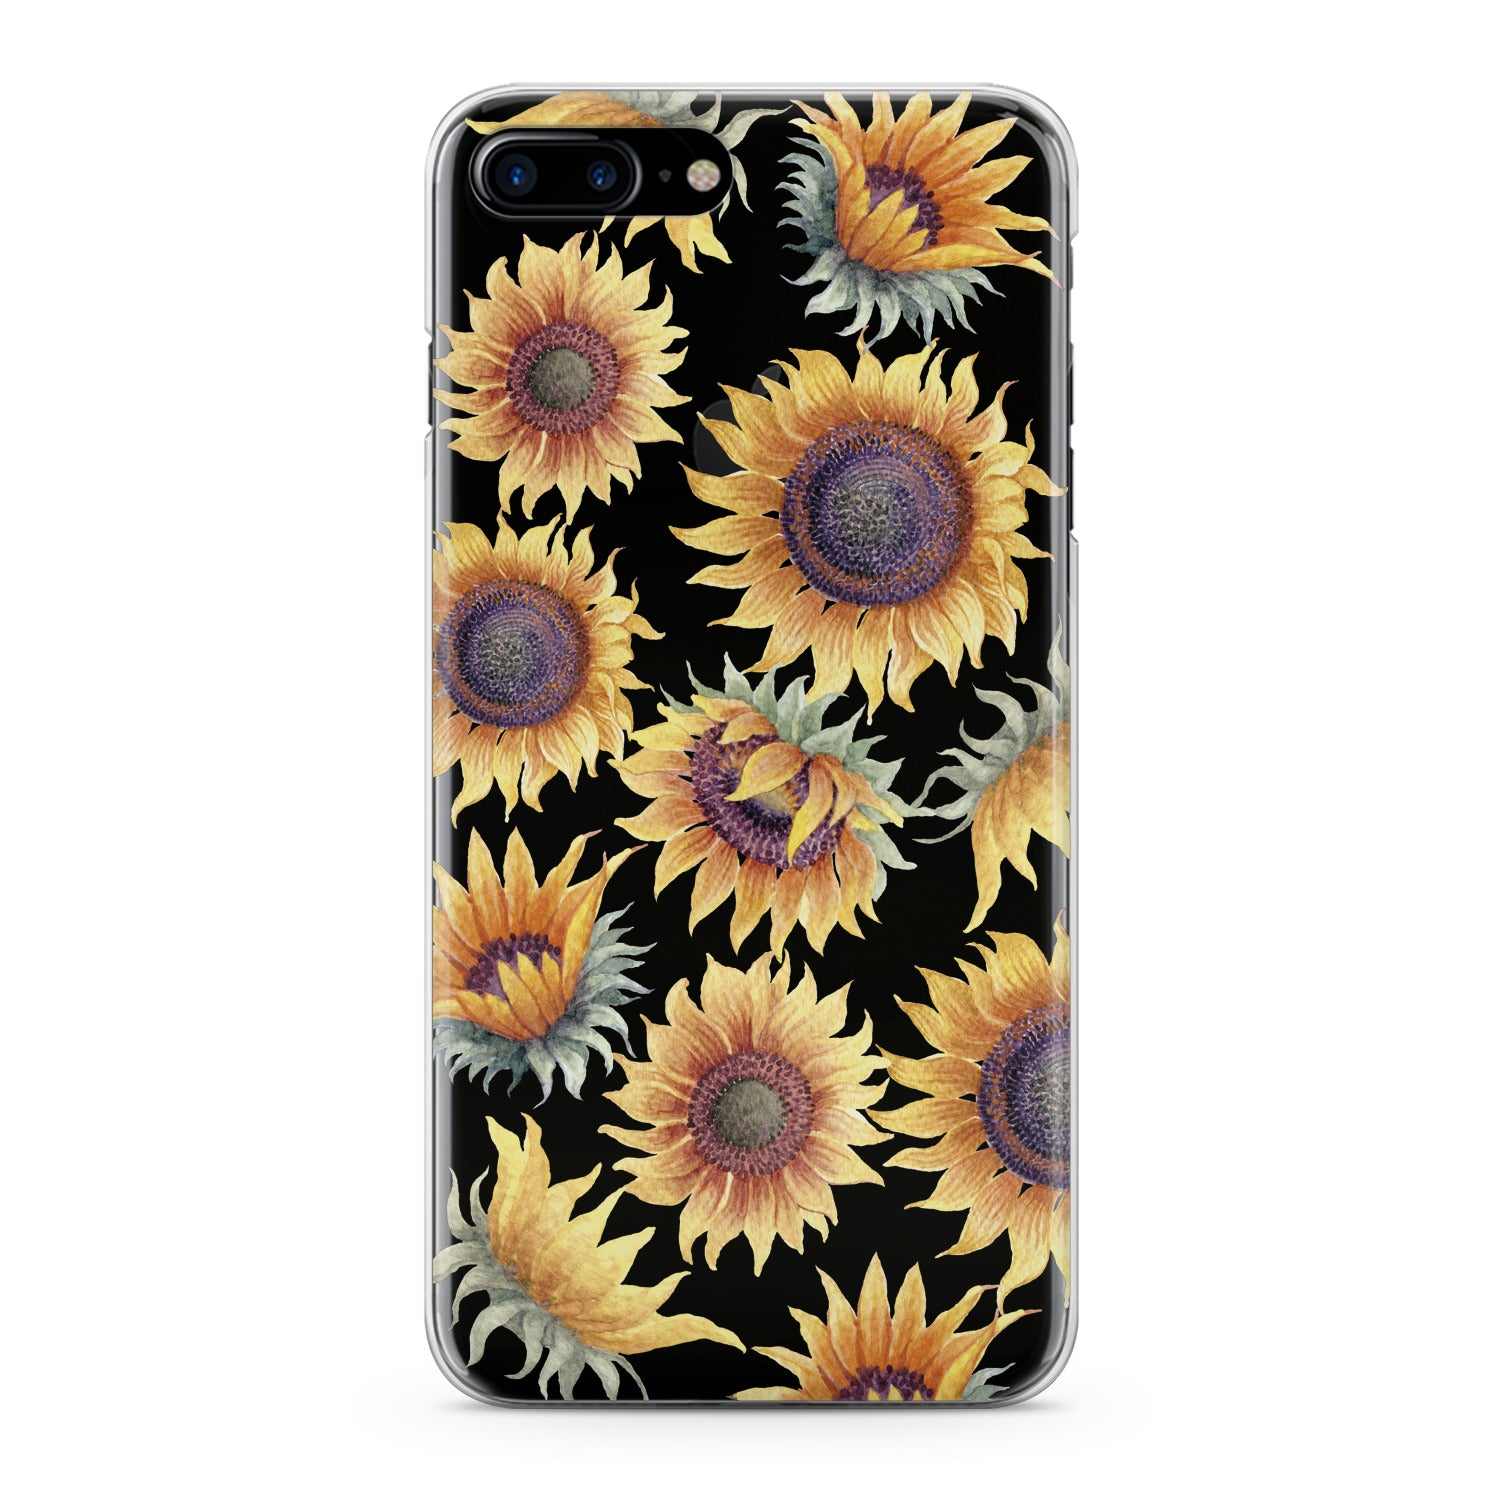 Lex Altern Beautiful Sunflowers Phone Case for your iPhone & Android phone.